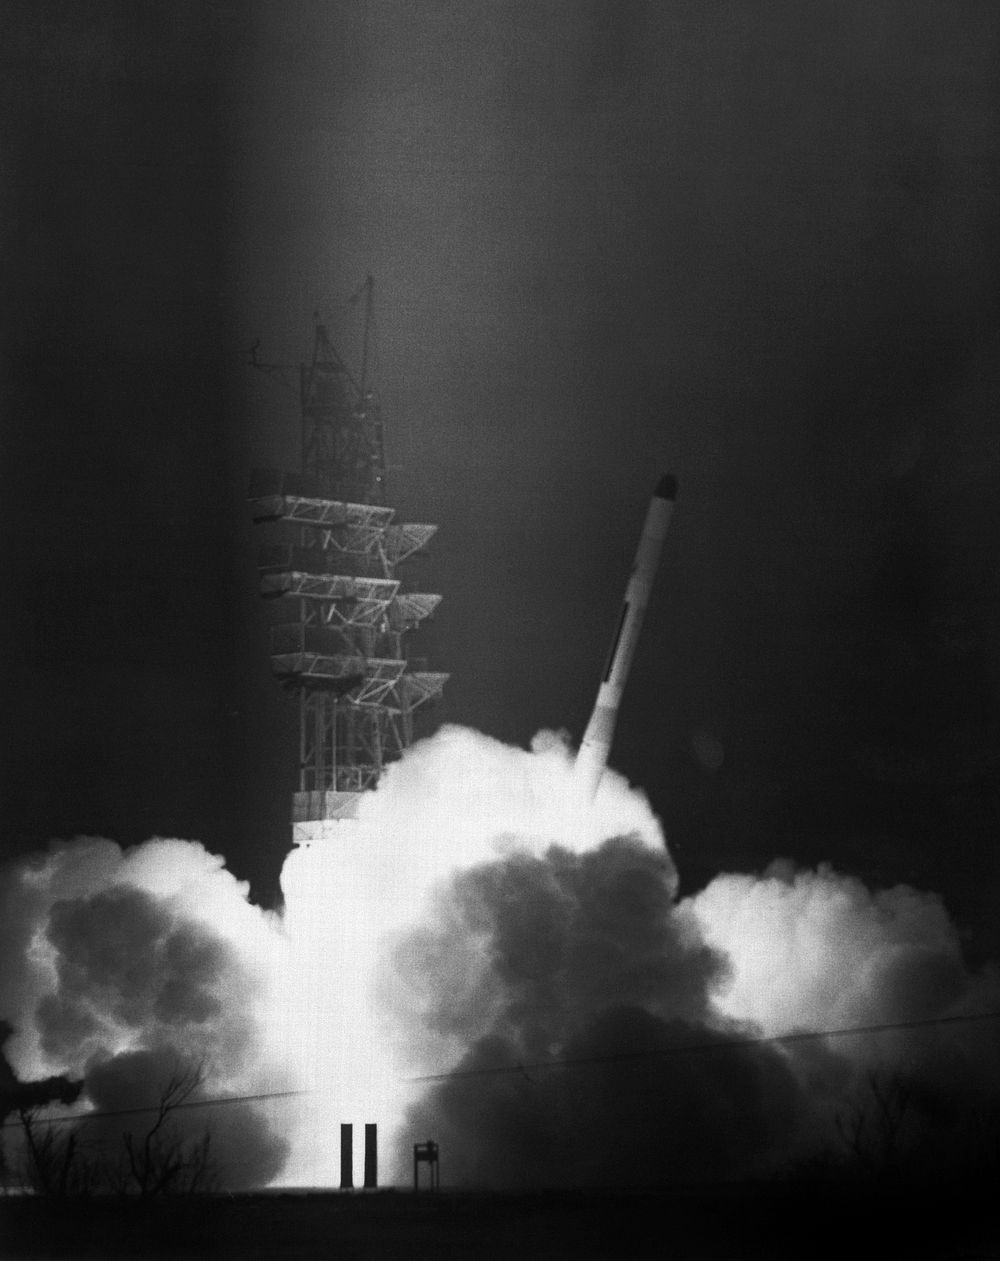 The first Scout prepared for launch at Wallops Island July 1, 1960. Original from NASA. Digitally enhanced by rawpixel.